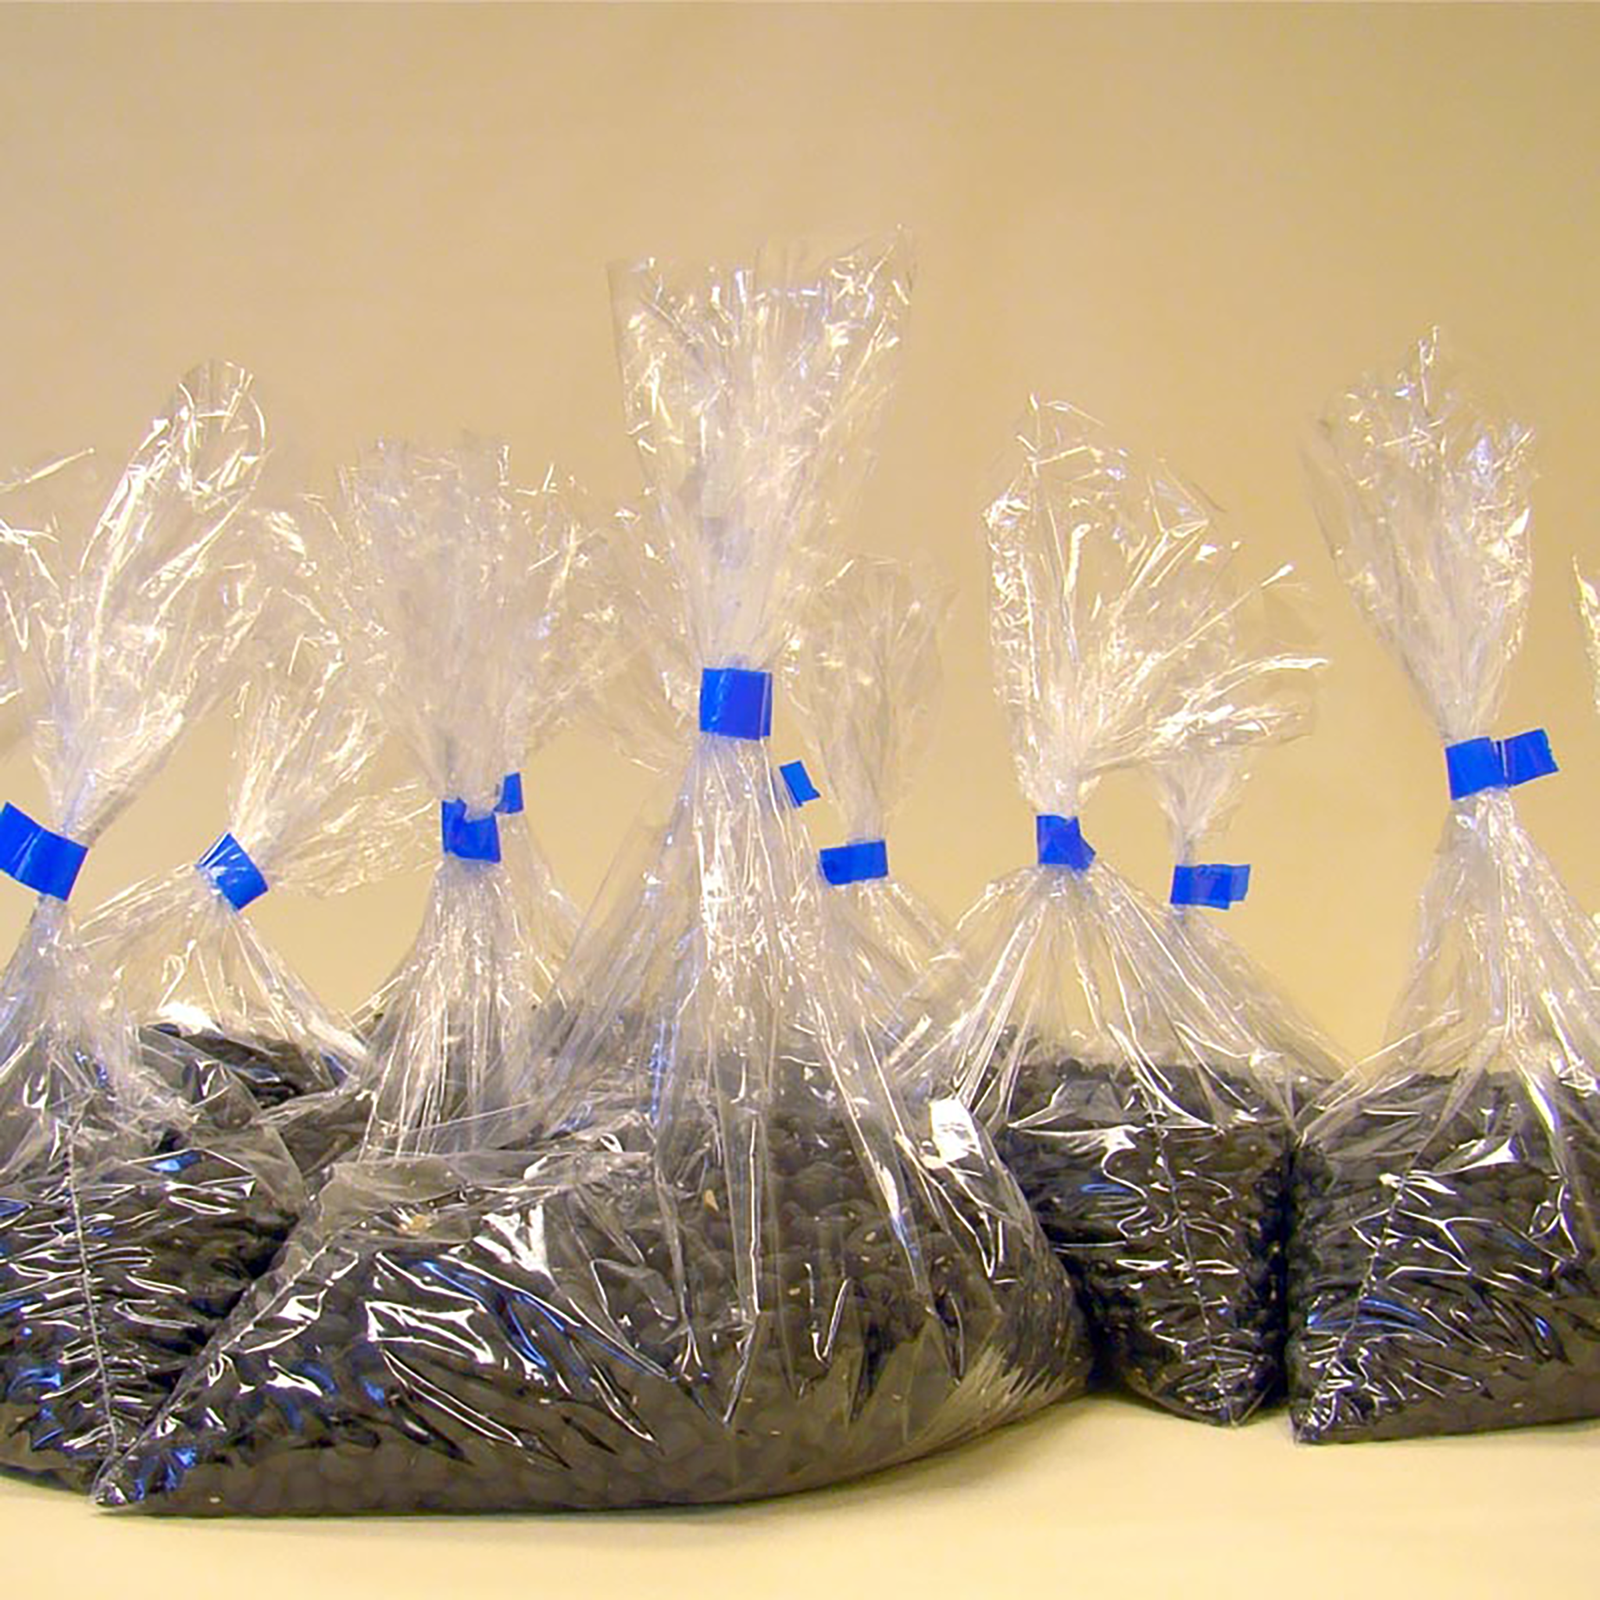 Several clear plastic bags filled with black beans and closed seal with JORESTECH blue tape